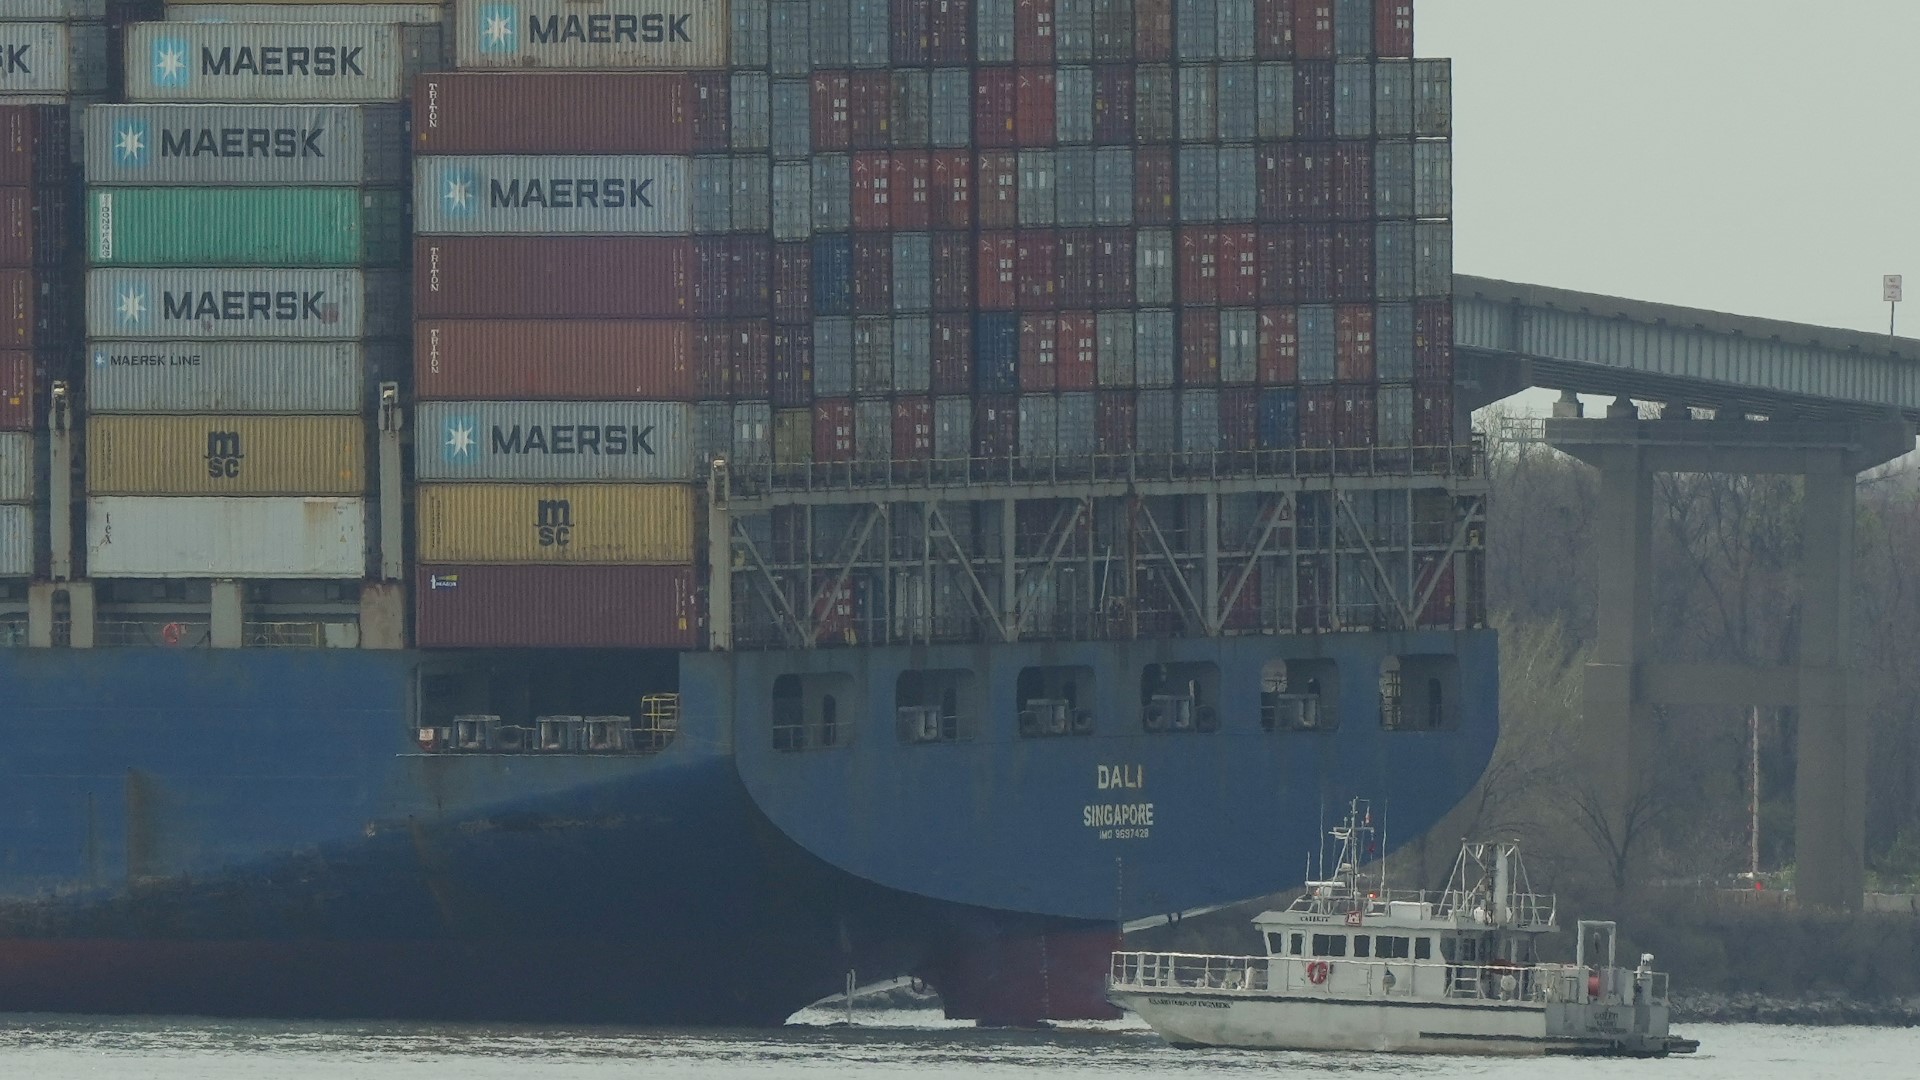 After the container ship hit the bridge and brought it down early Tuesday, ship traffic entering and leaving the Port of Baltimore was suspended indefinitely.